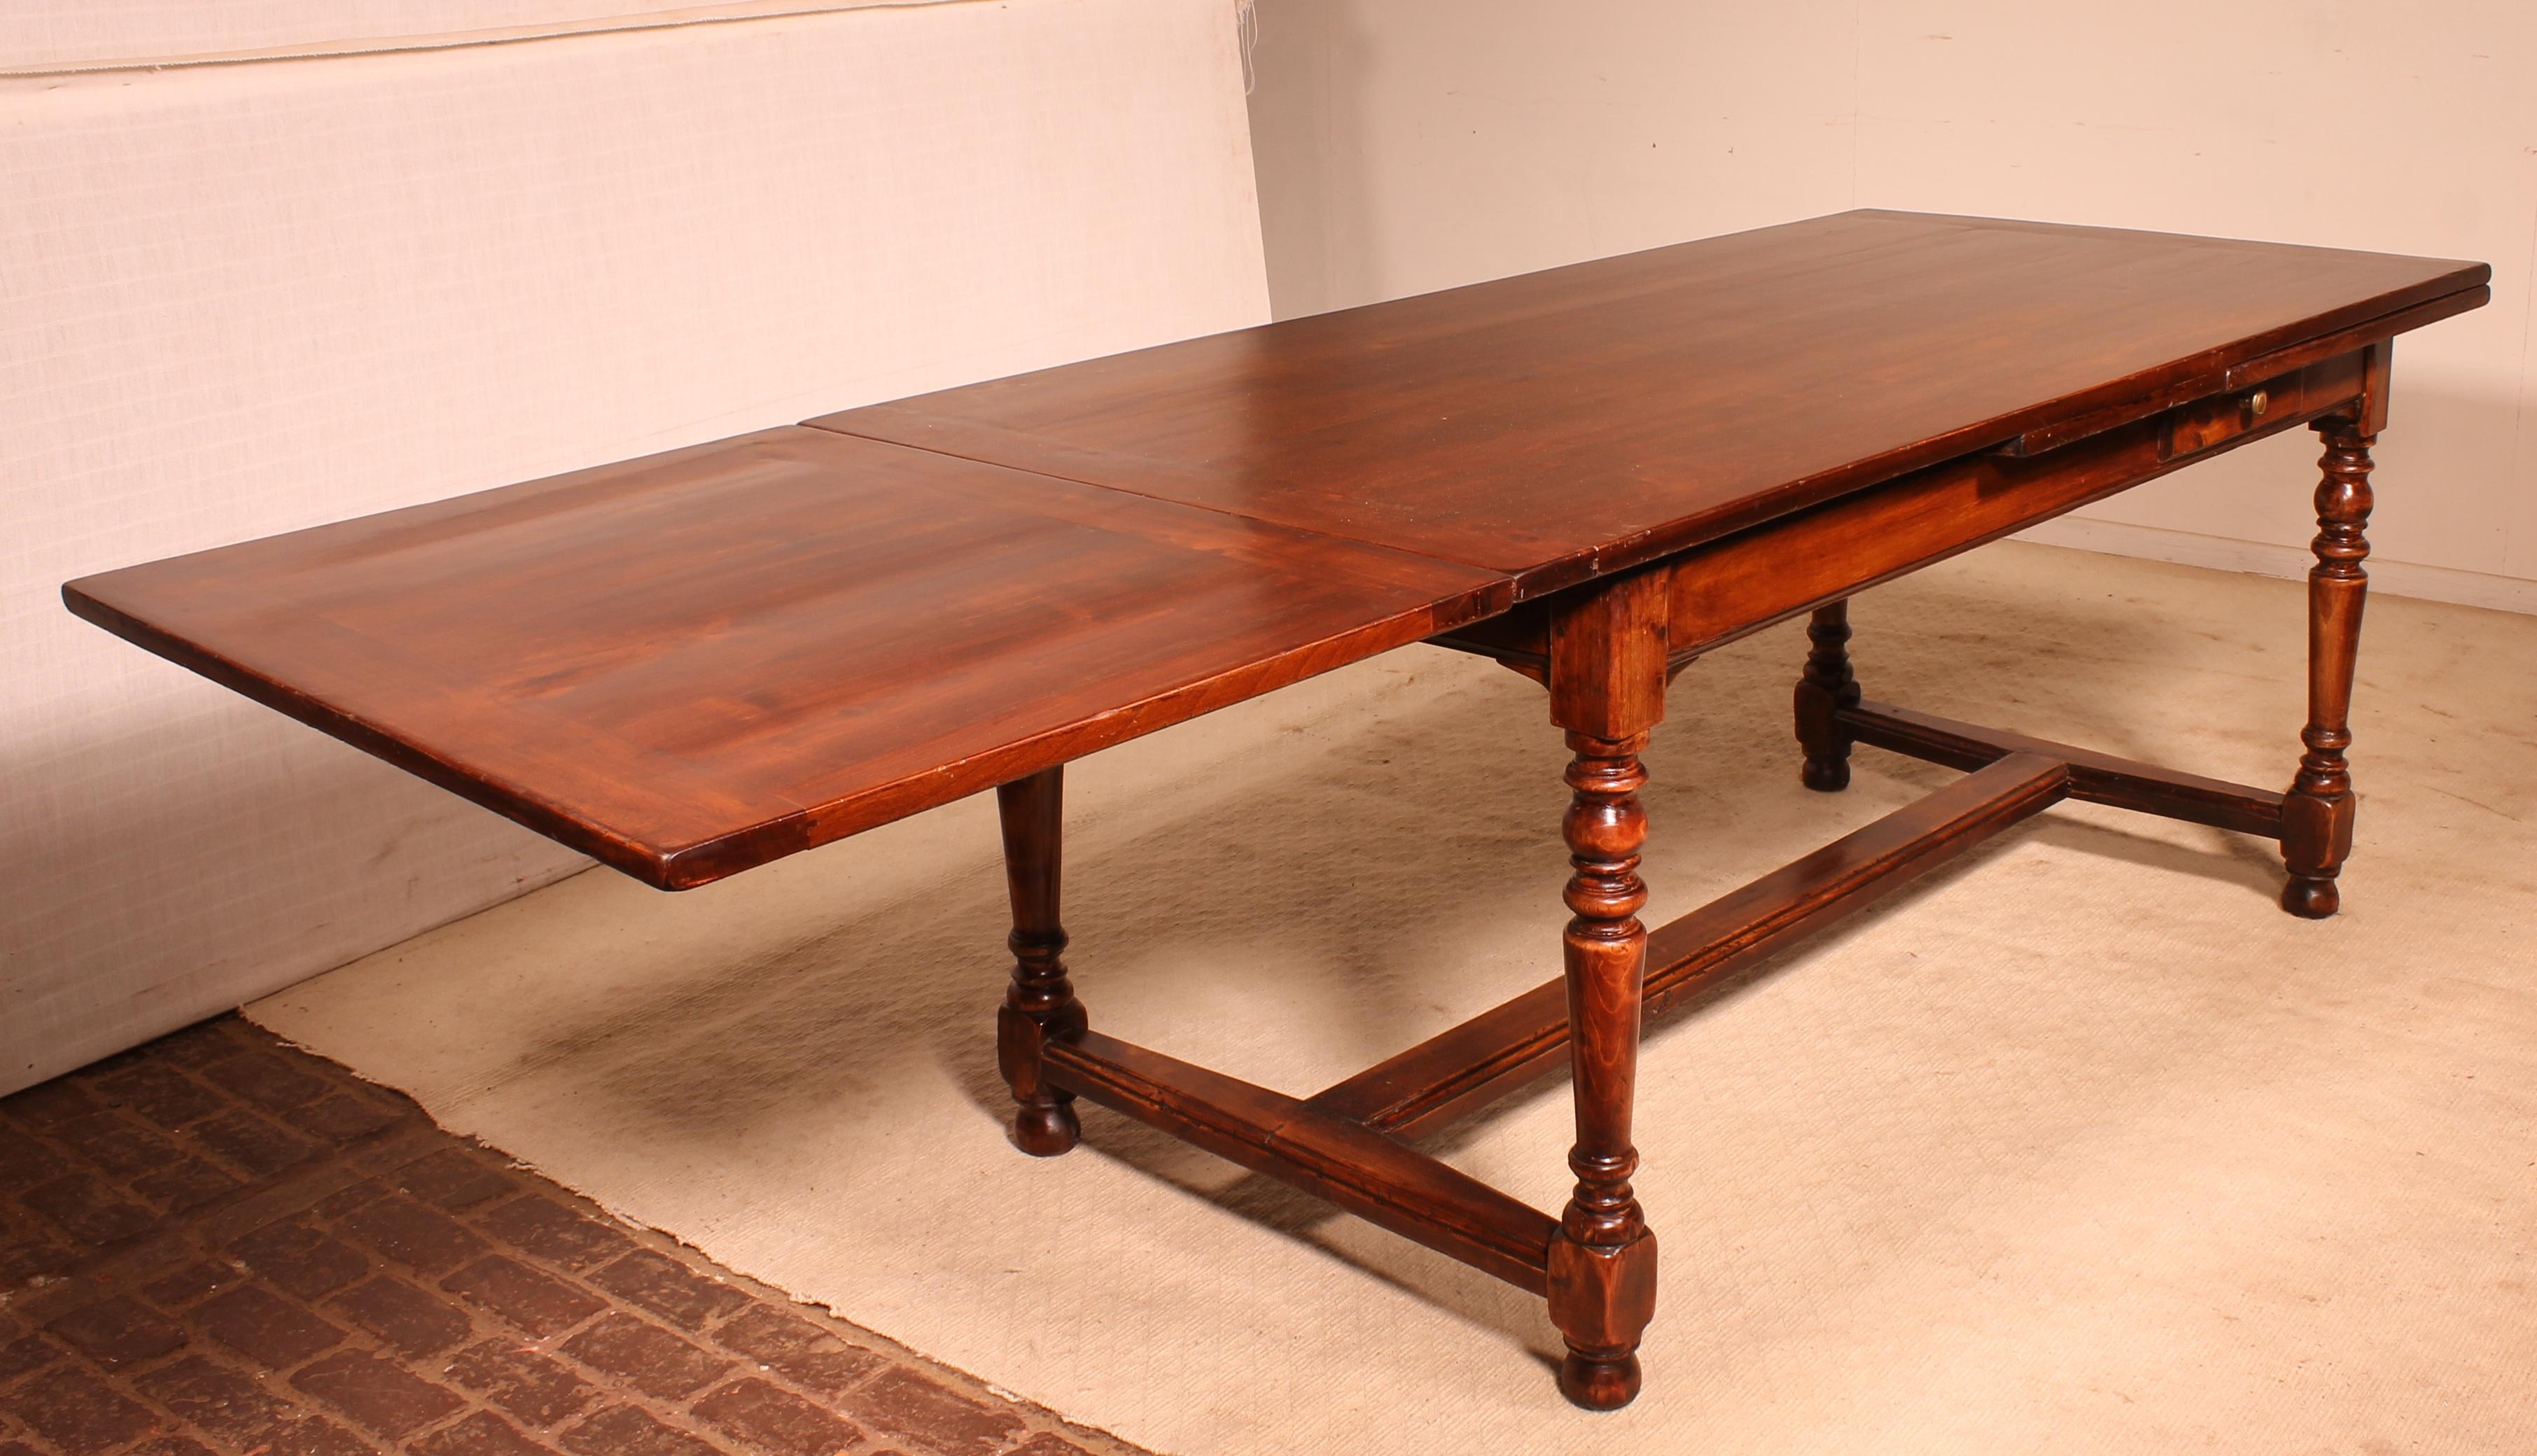 A fine 19th century extending table in cherry wood with turned legs in Louis XIII style 

Very nice French table with a length of 1m 74 and the possibility to reach 3m 08 with the two extensions open

 Very nice dining table with elegant turned